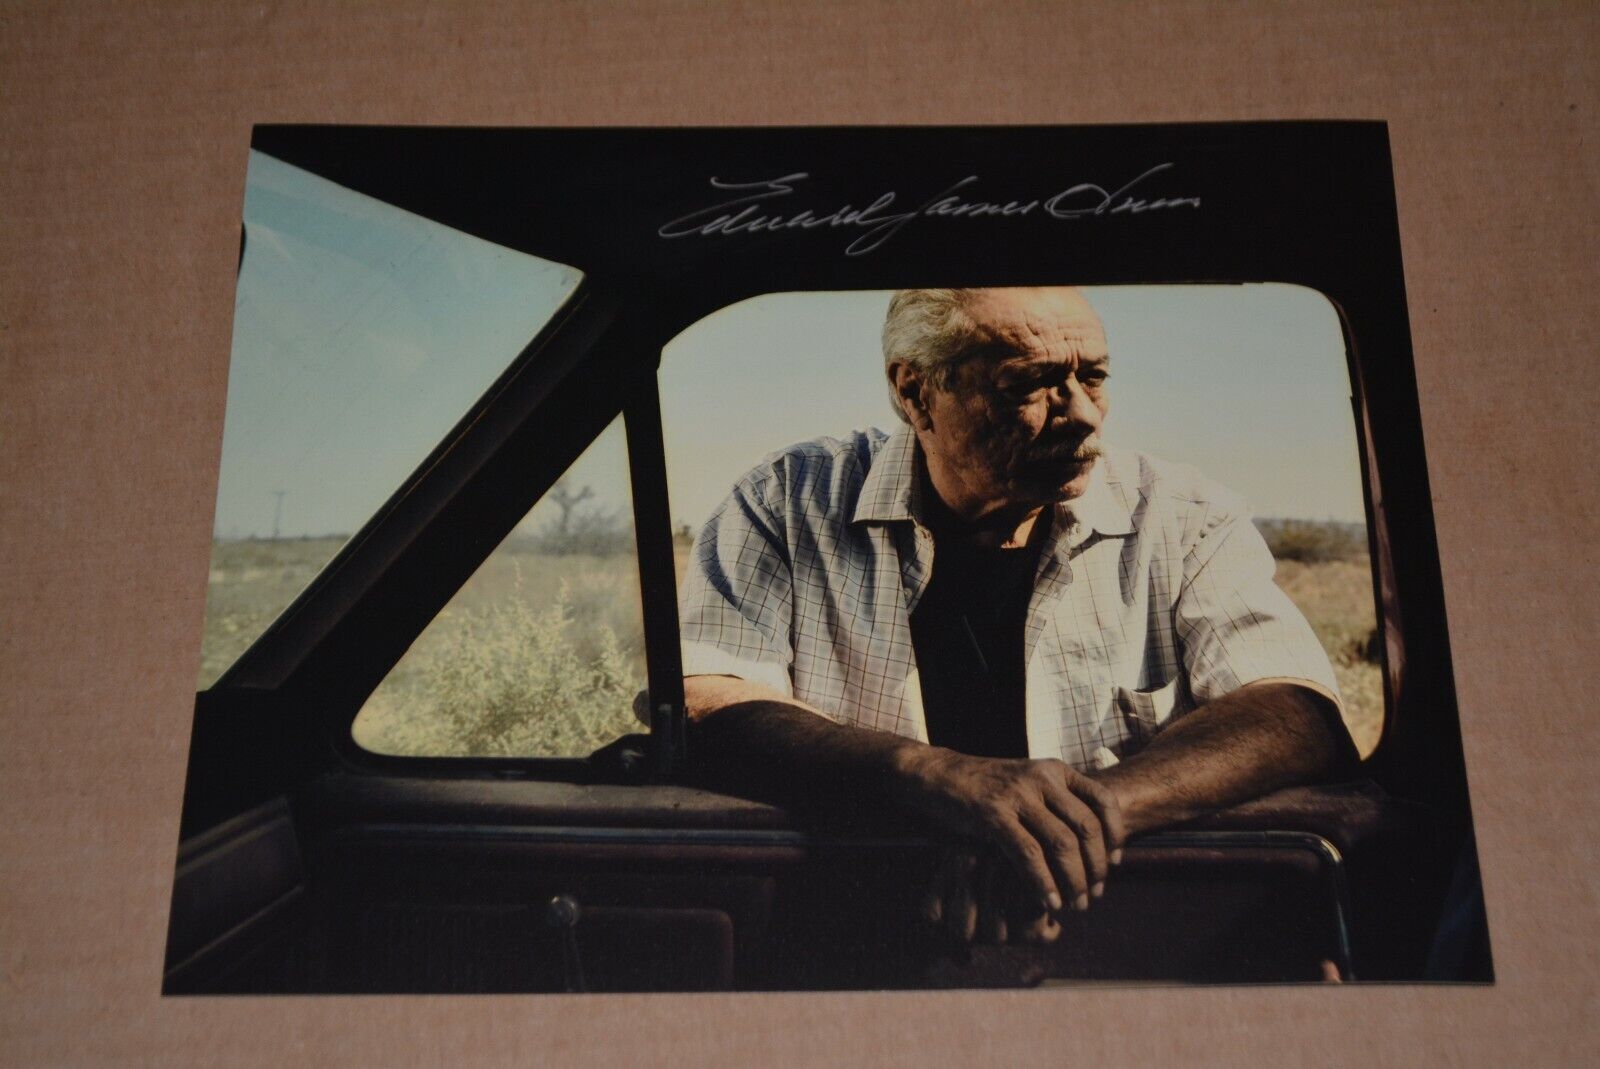 EDWARD JAMES OLMOS signed autograph In Person 8x10 20x25 cm DEXTER